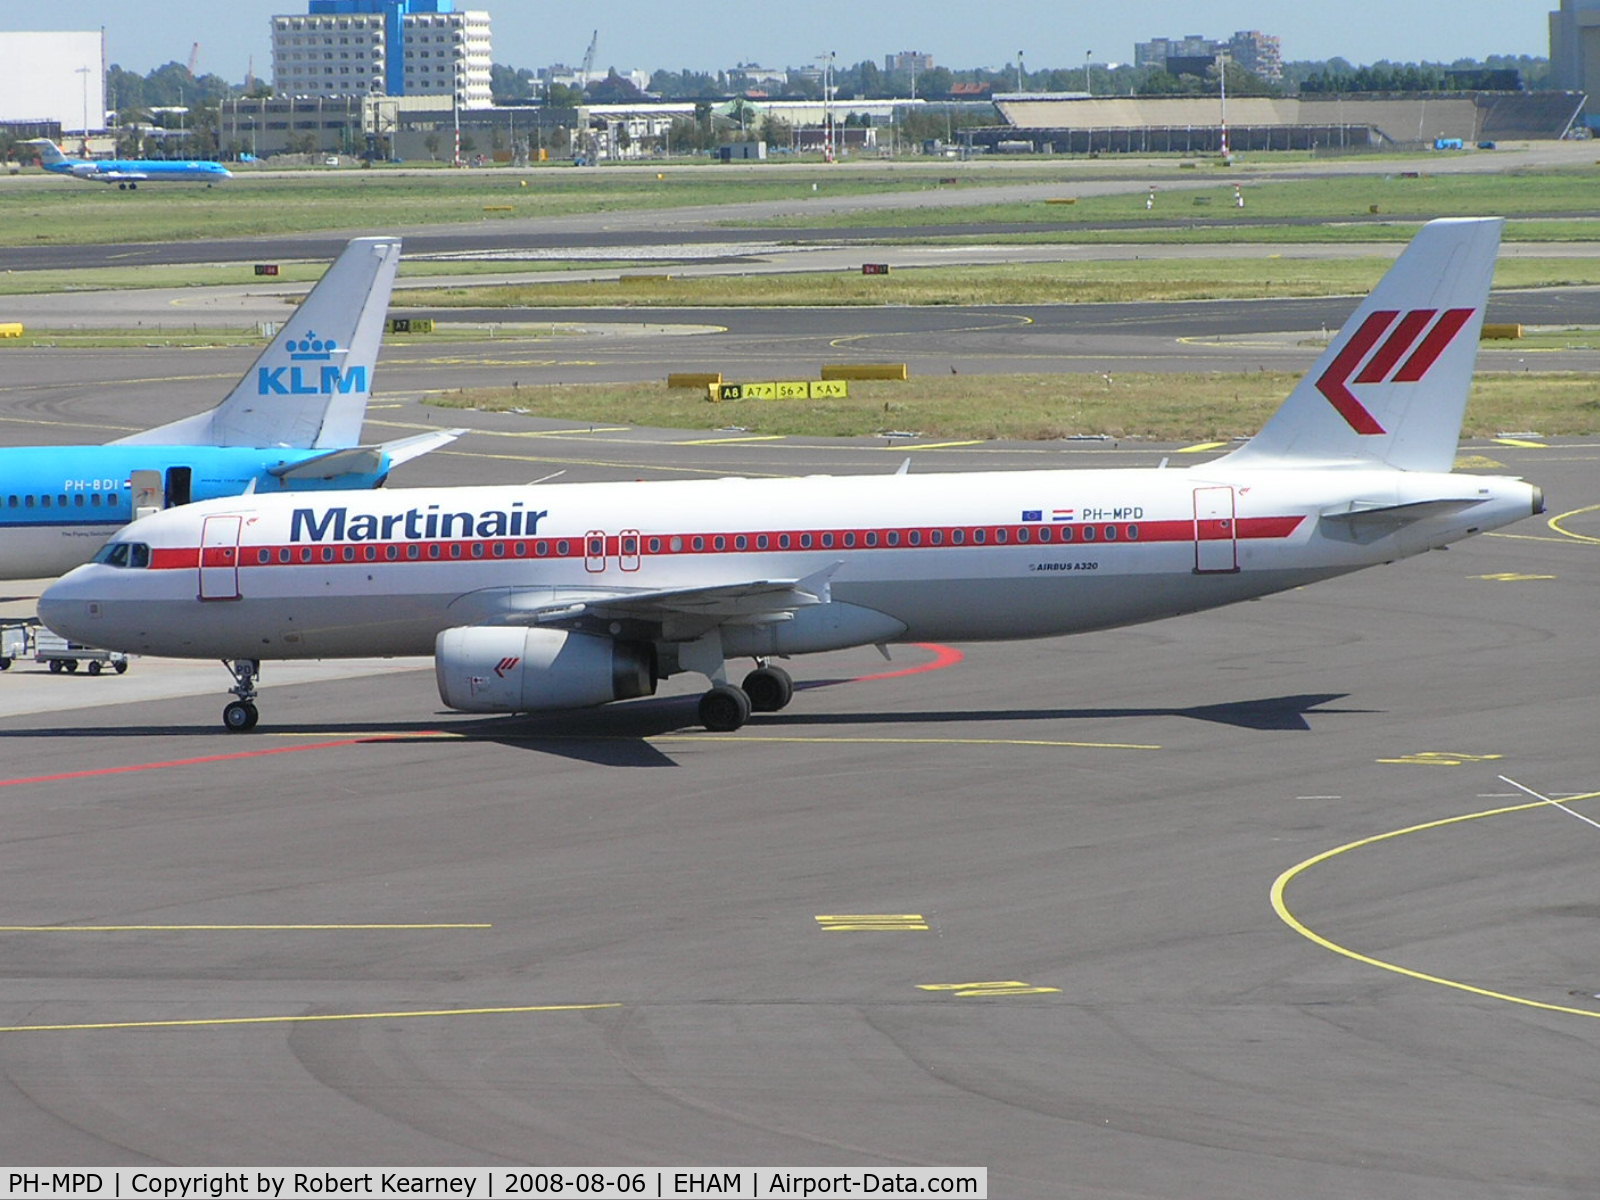 PH-MPD, 2003 Airbus A320-232 C/N 1944, Martinair going onto stand